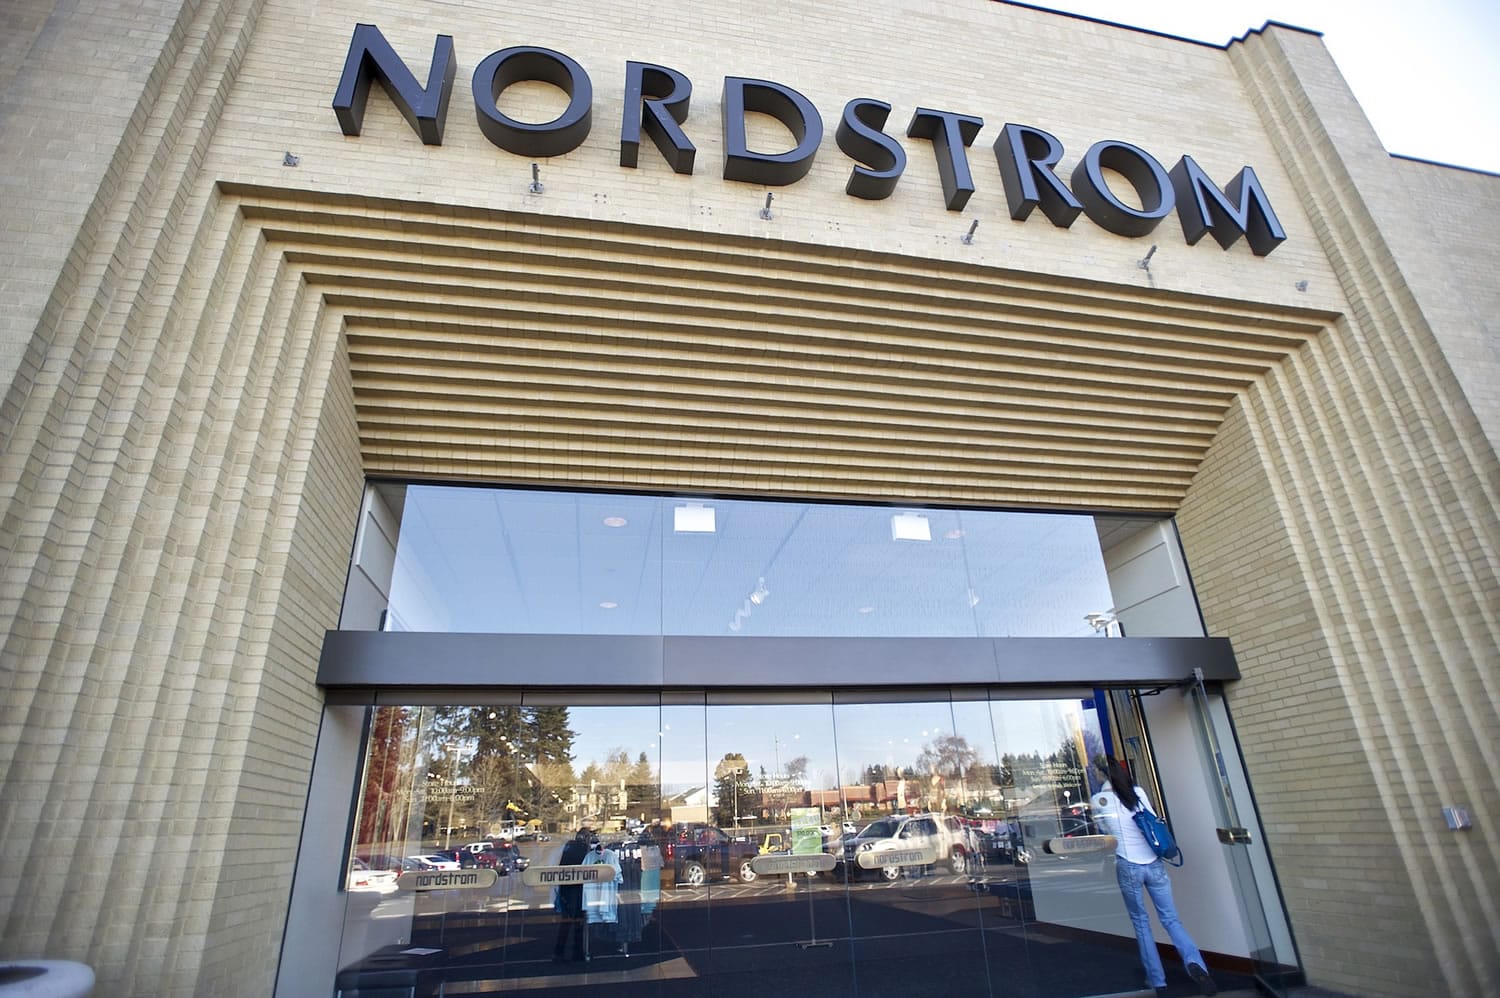 Gold's Gym will take over the top floor space formerly occupied by Nordstrom in Vancouver mall.